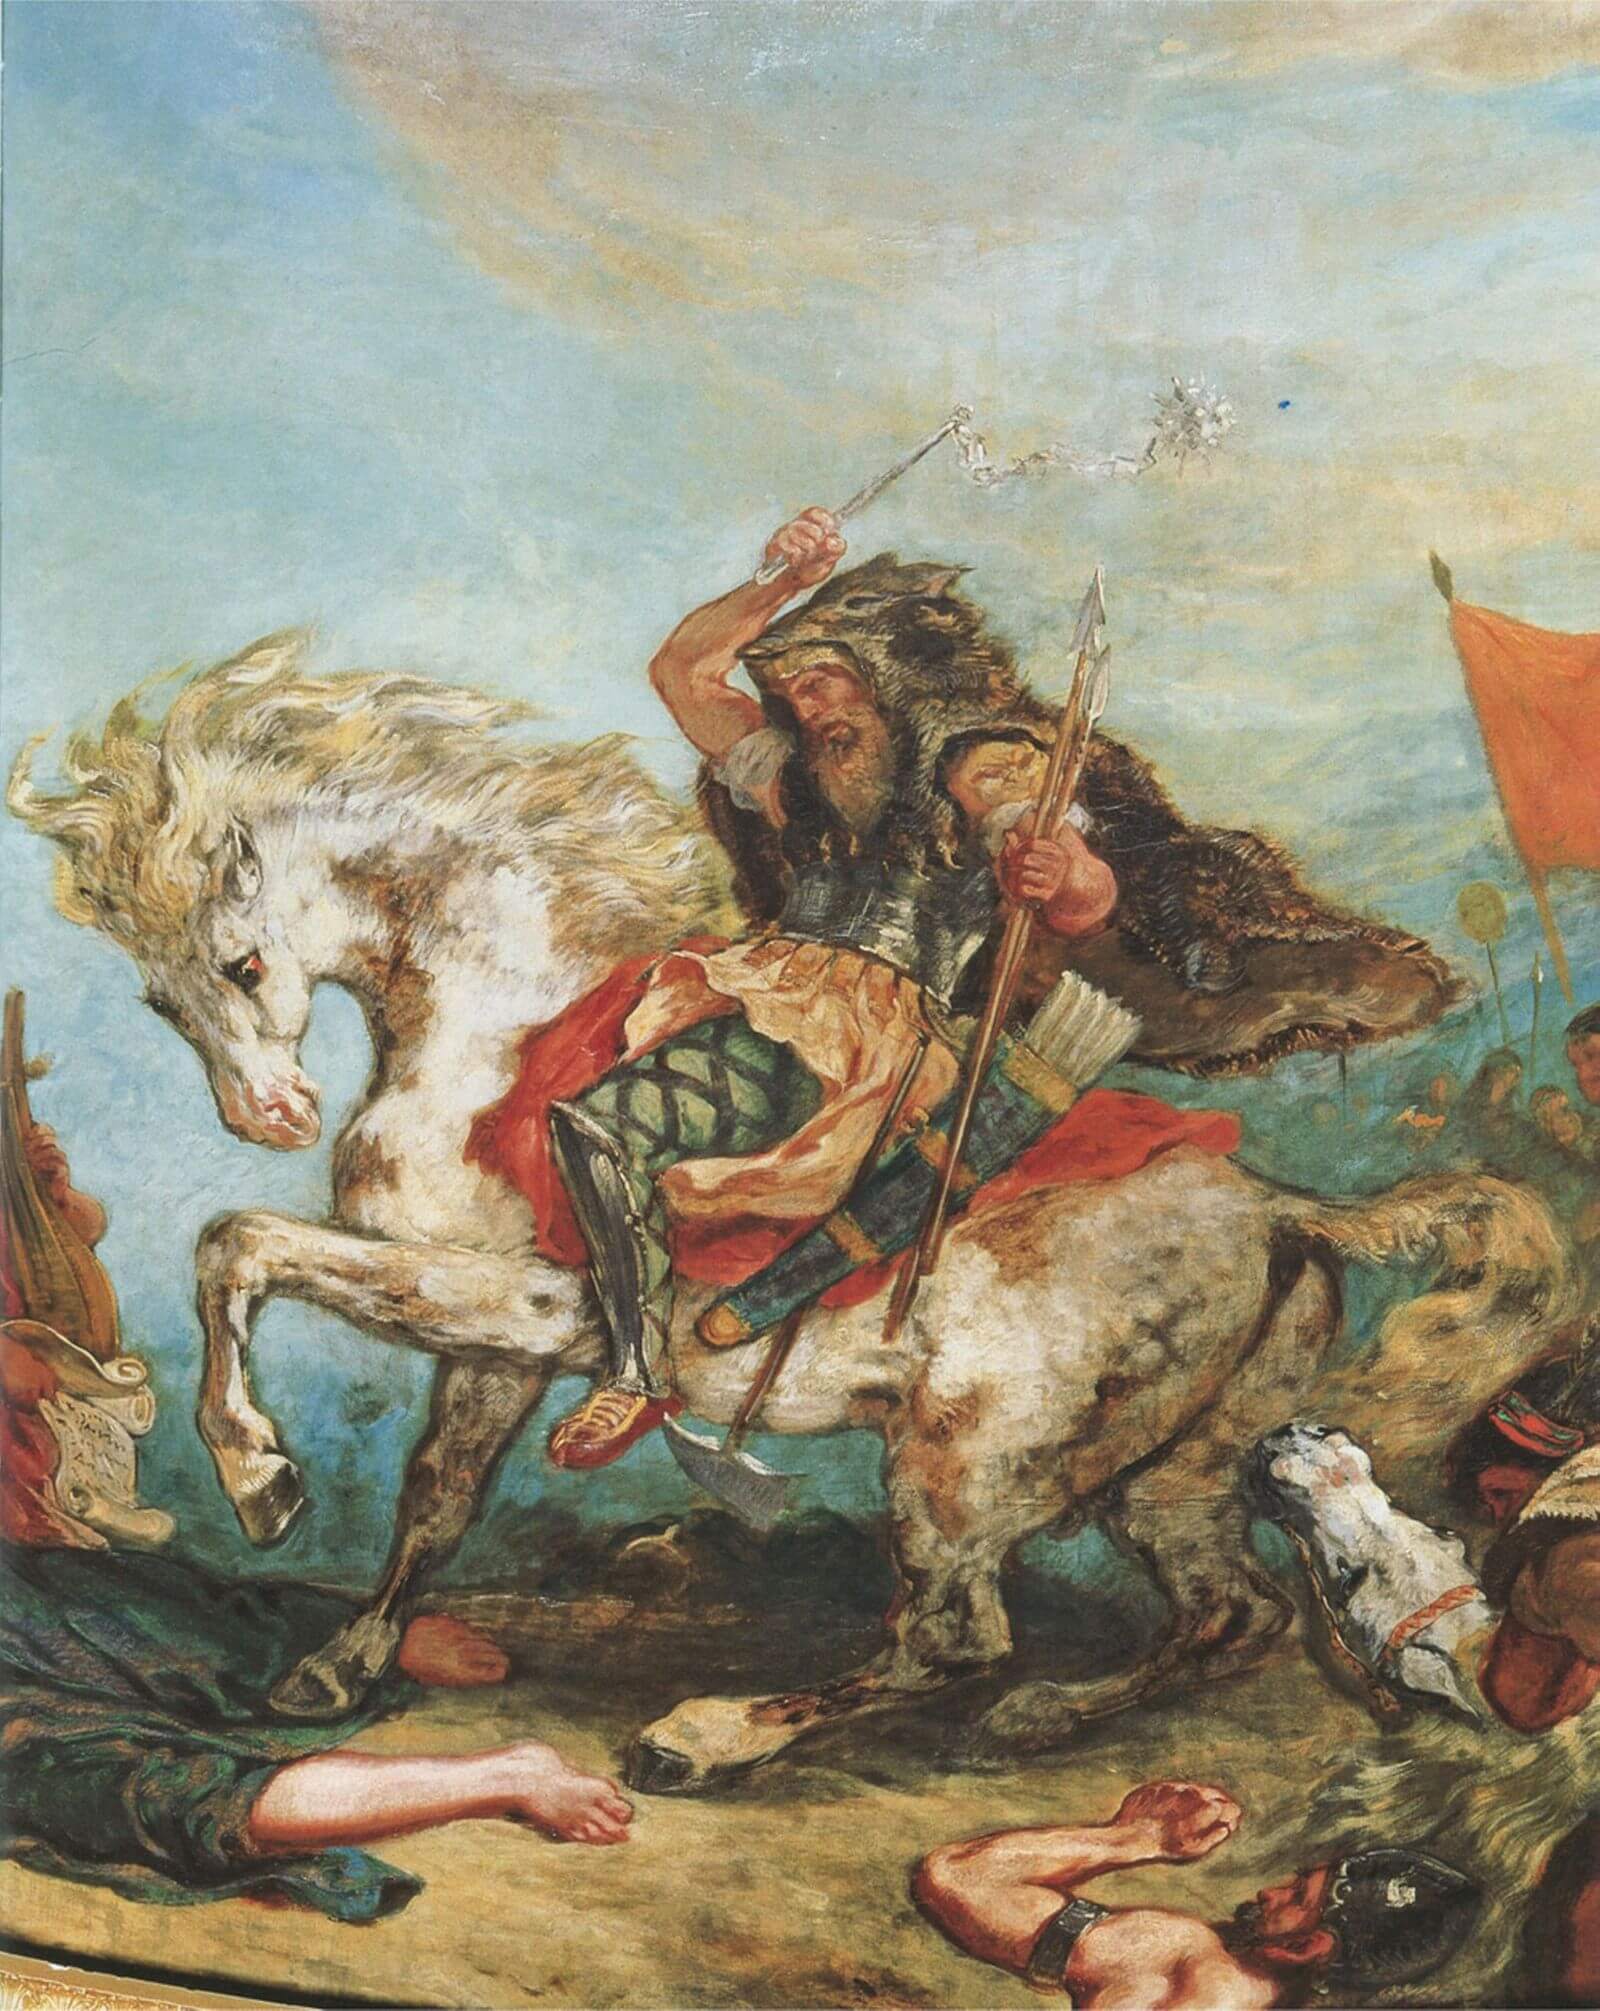 Biography of Attila - Who Was Attila The Hun and Known For?